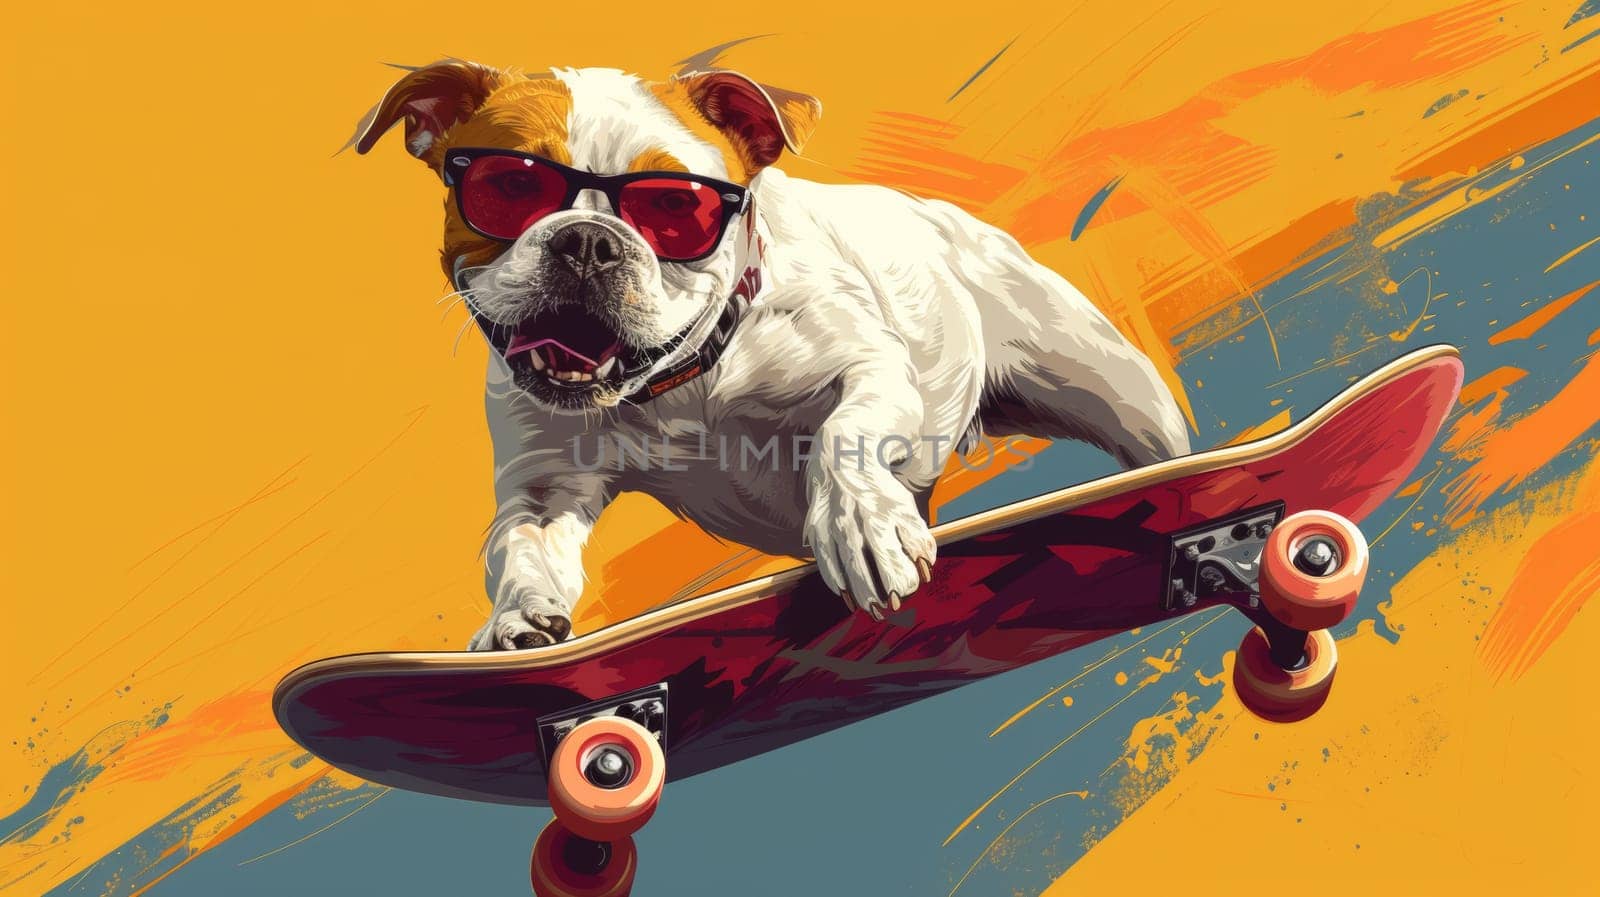 A painting of a dog riding on top of a skateboard